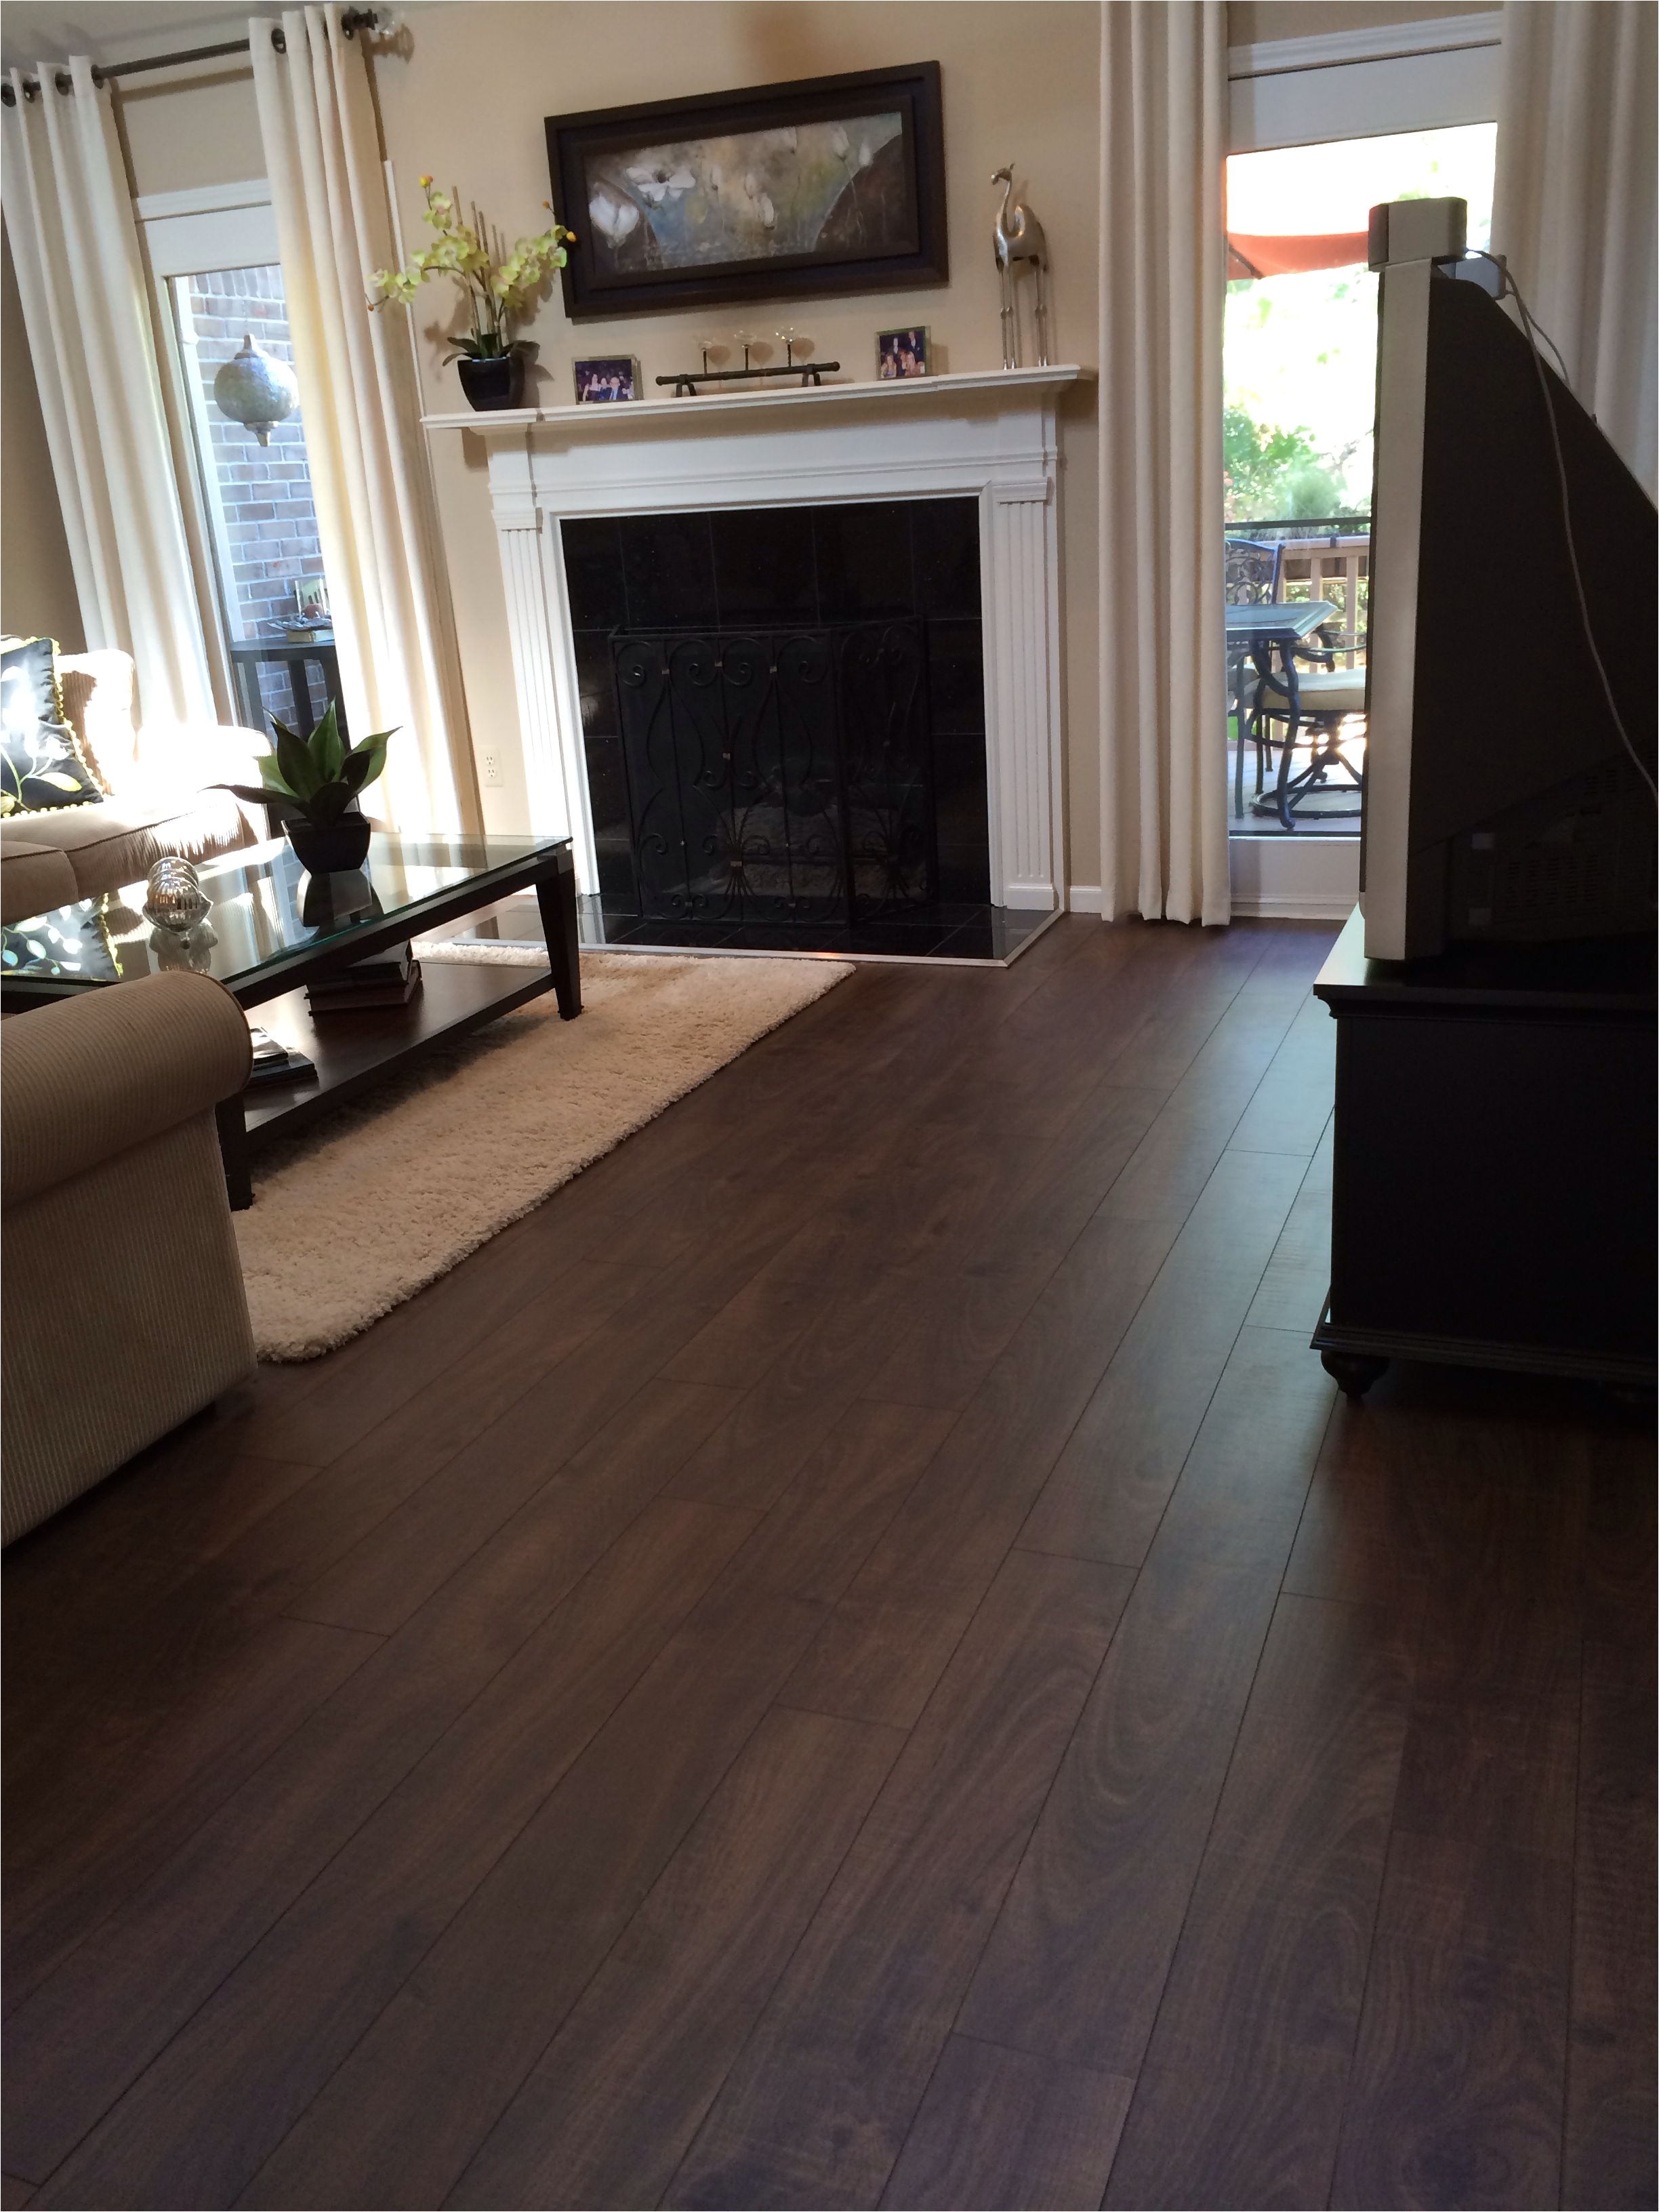 we are inspired by laminate floor ideas for more inspiration visit us at https www facebook com nufloorsfortmcmurray